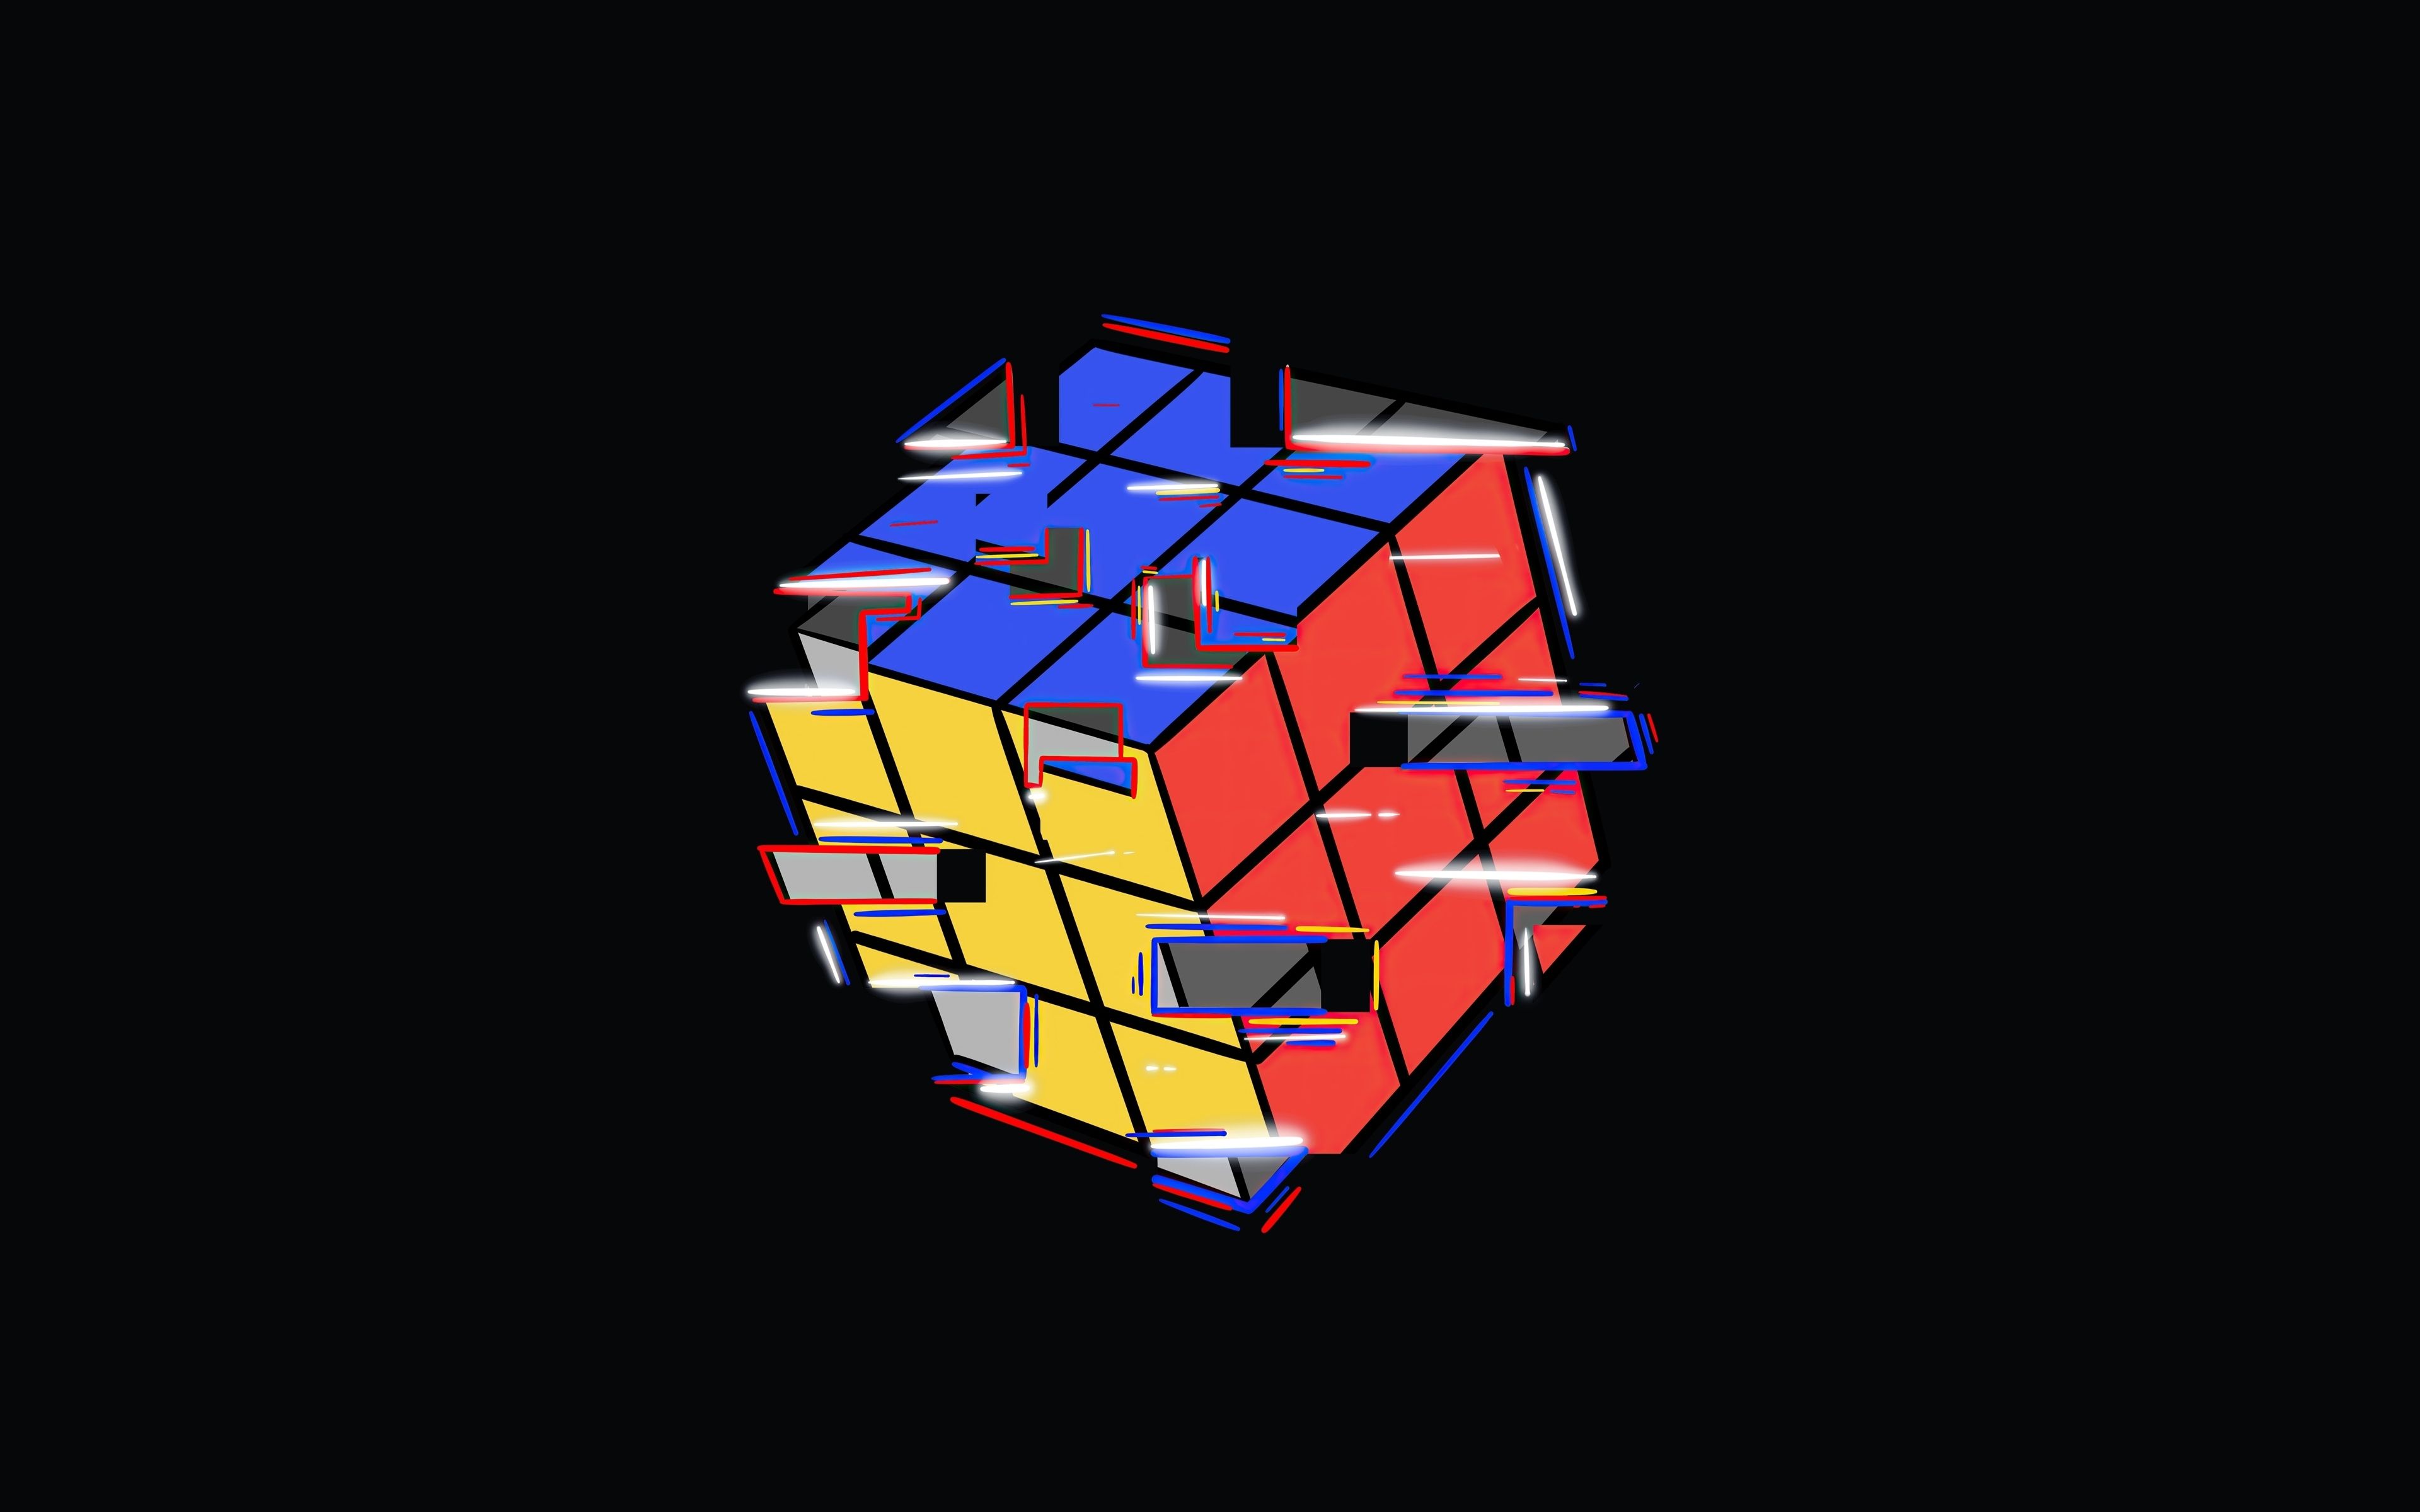 Download 3840x2400 wallpaper rubik cube, colorful, abstract, dark, 4k, ultra HD 16: widescreen, 3840x2400 HD image, background, 25743